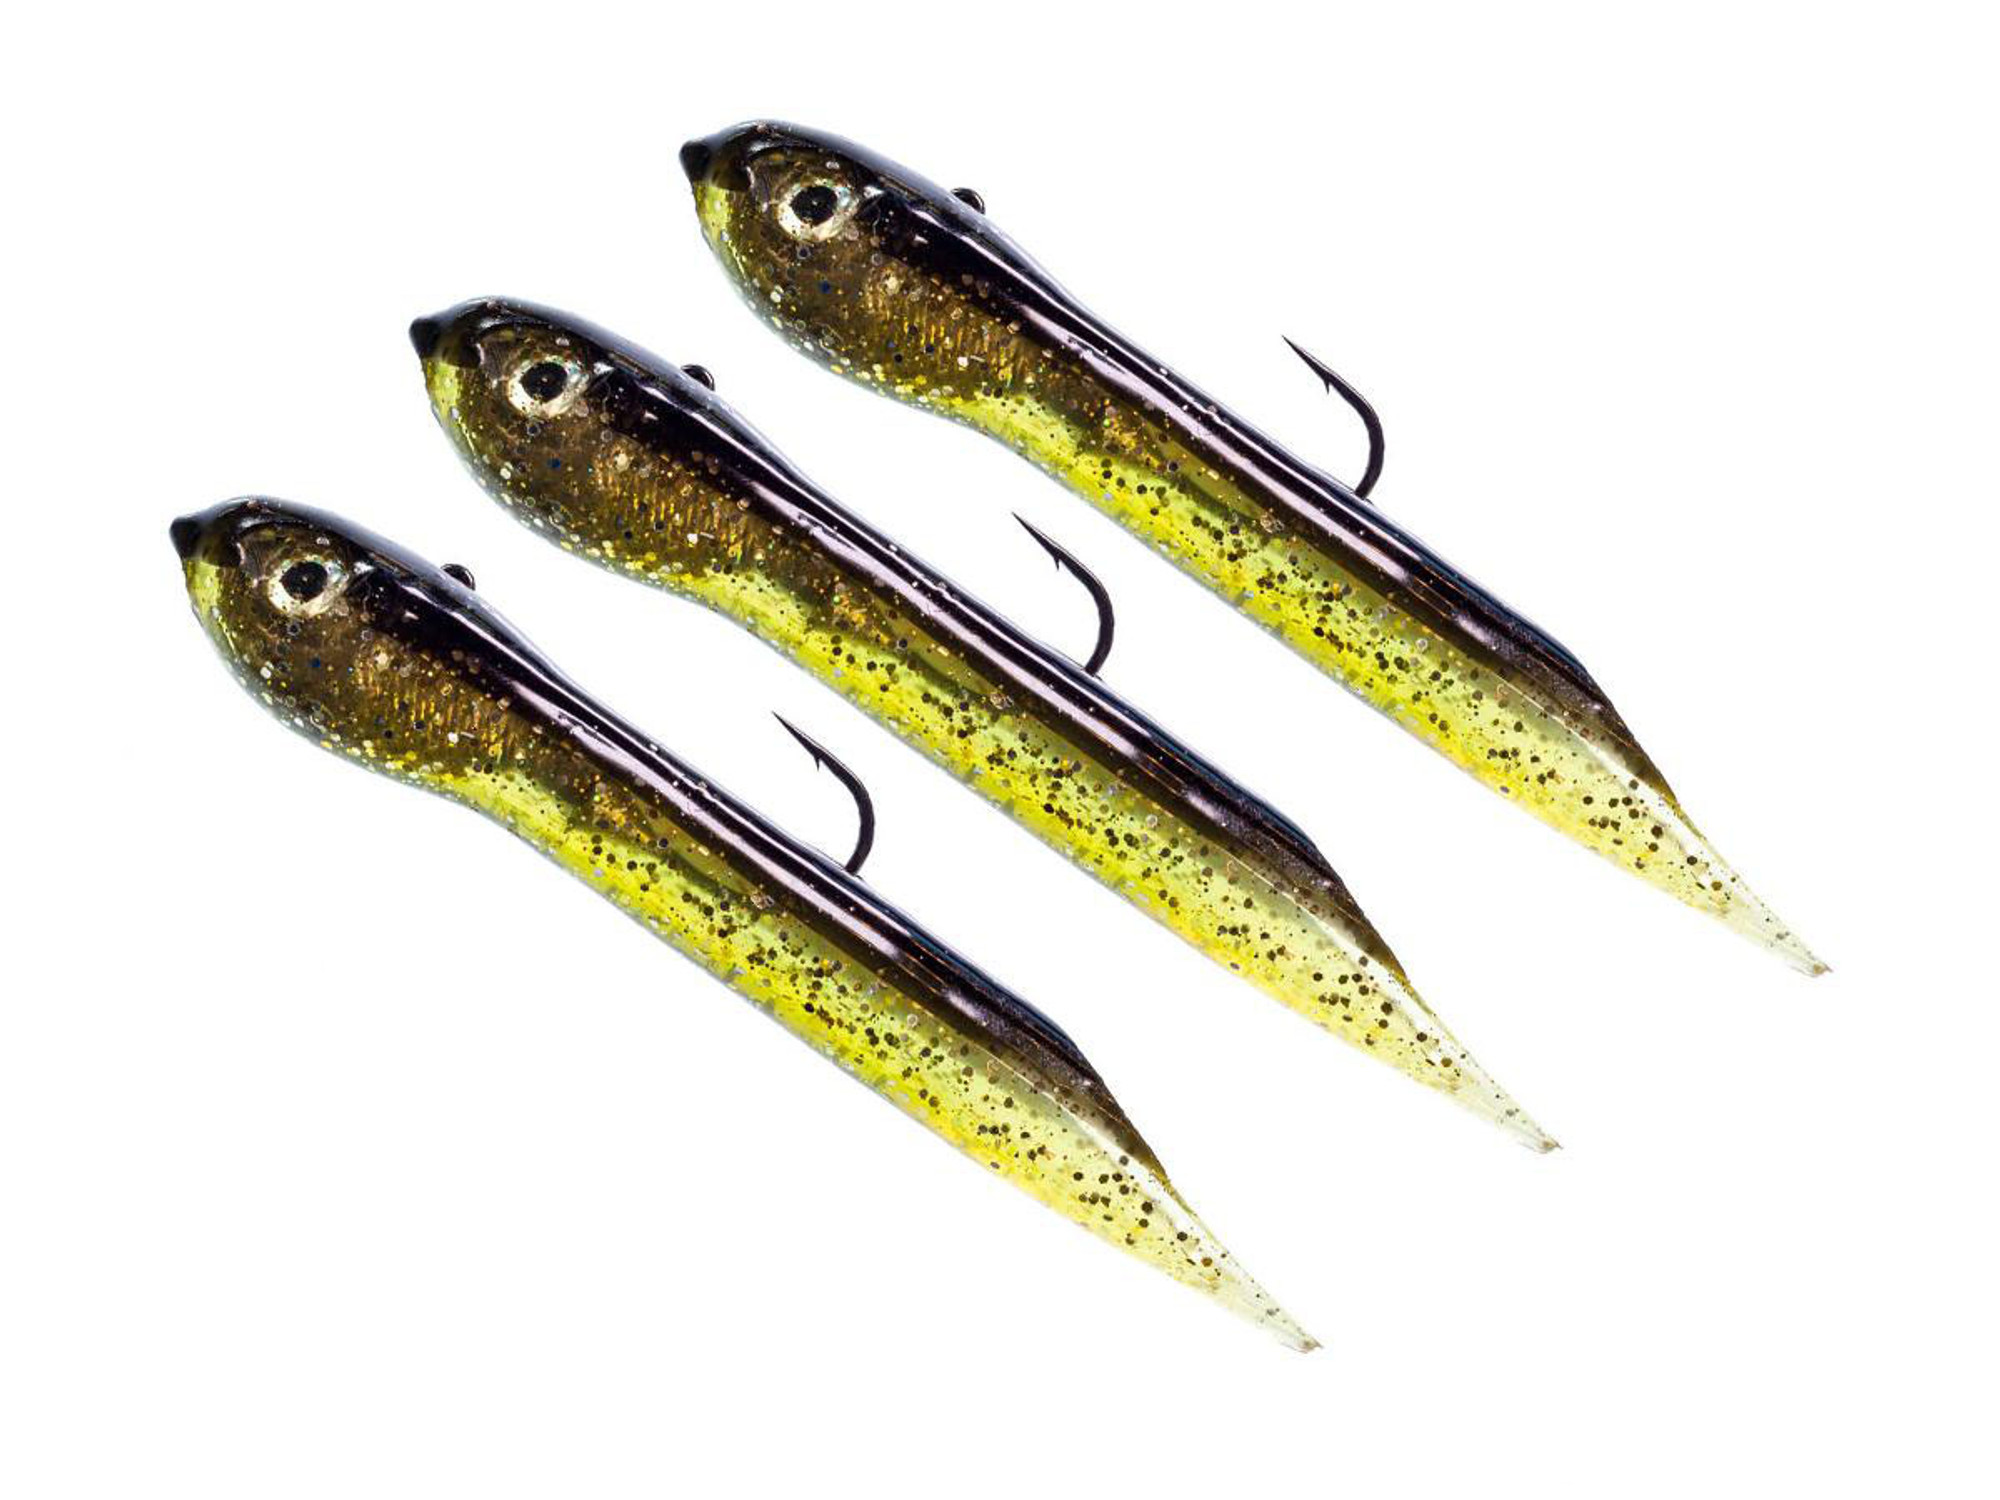 Hook Up Baits Handcrafted Soft Fishing Jigs (Color: Black Gold / 3" / 1/8 oz)